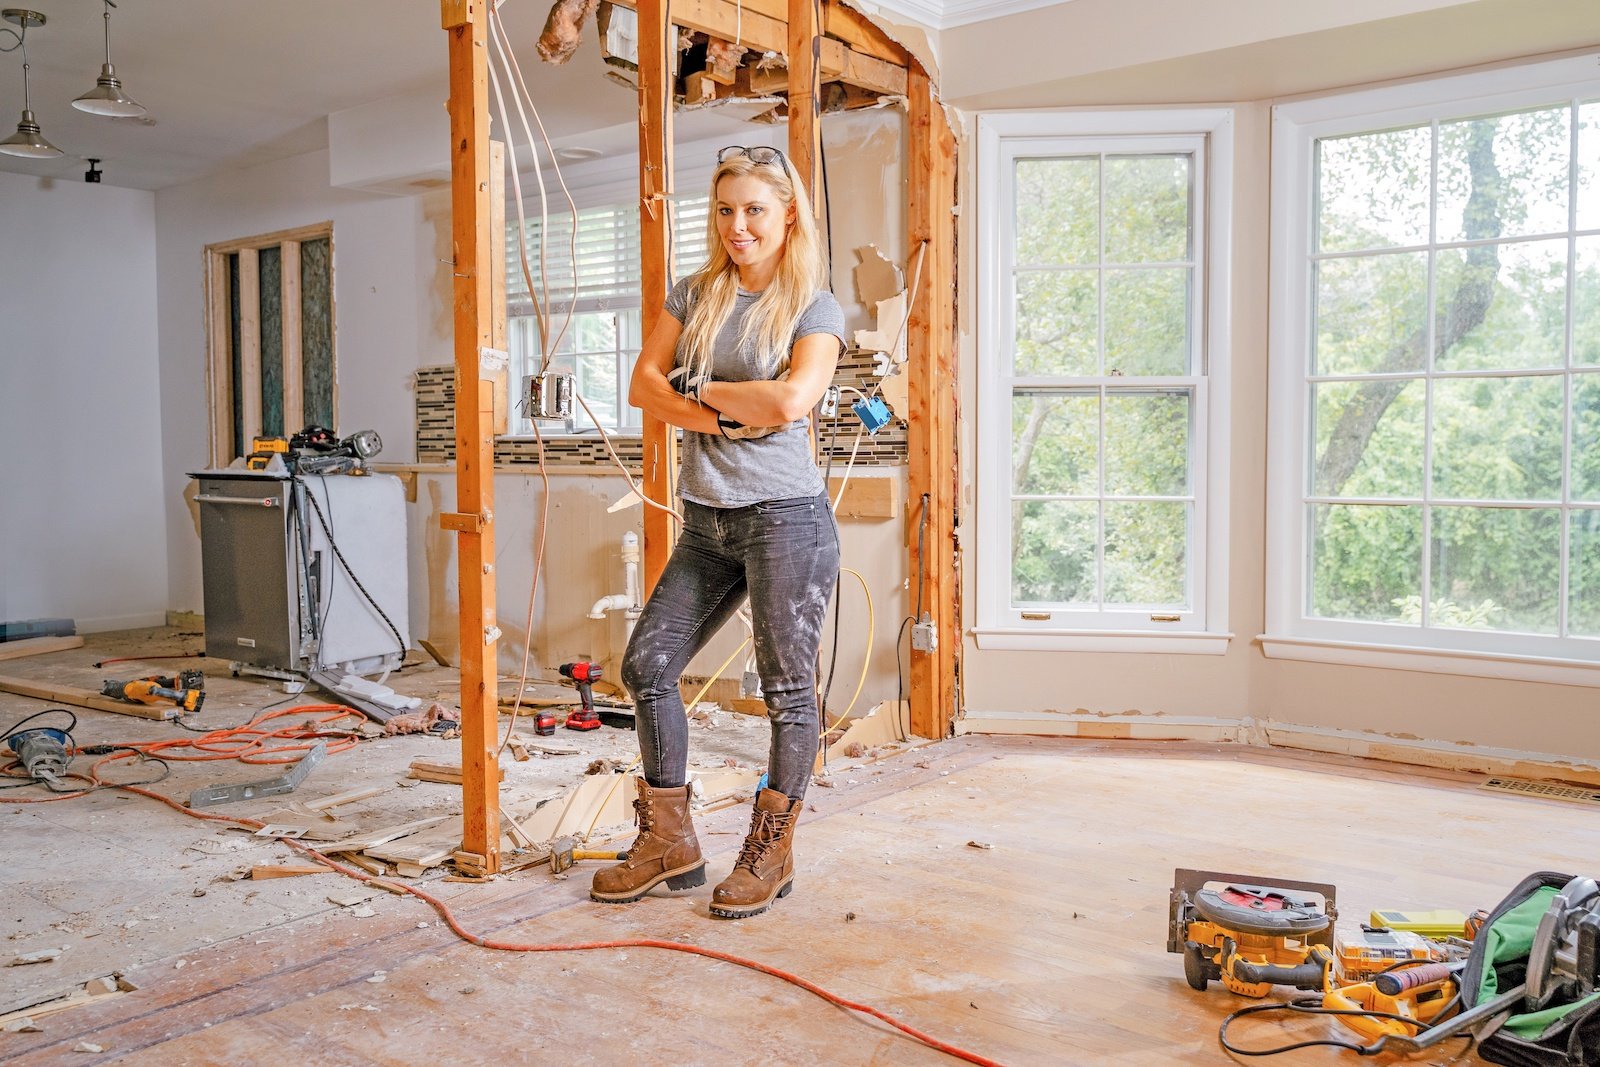 Cristy Lee poses in the middle of a home renovation on 'Steal This House'